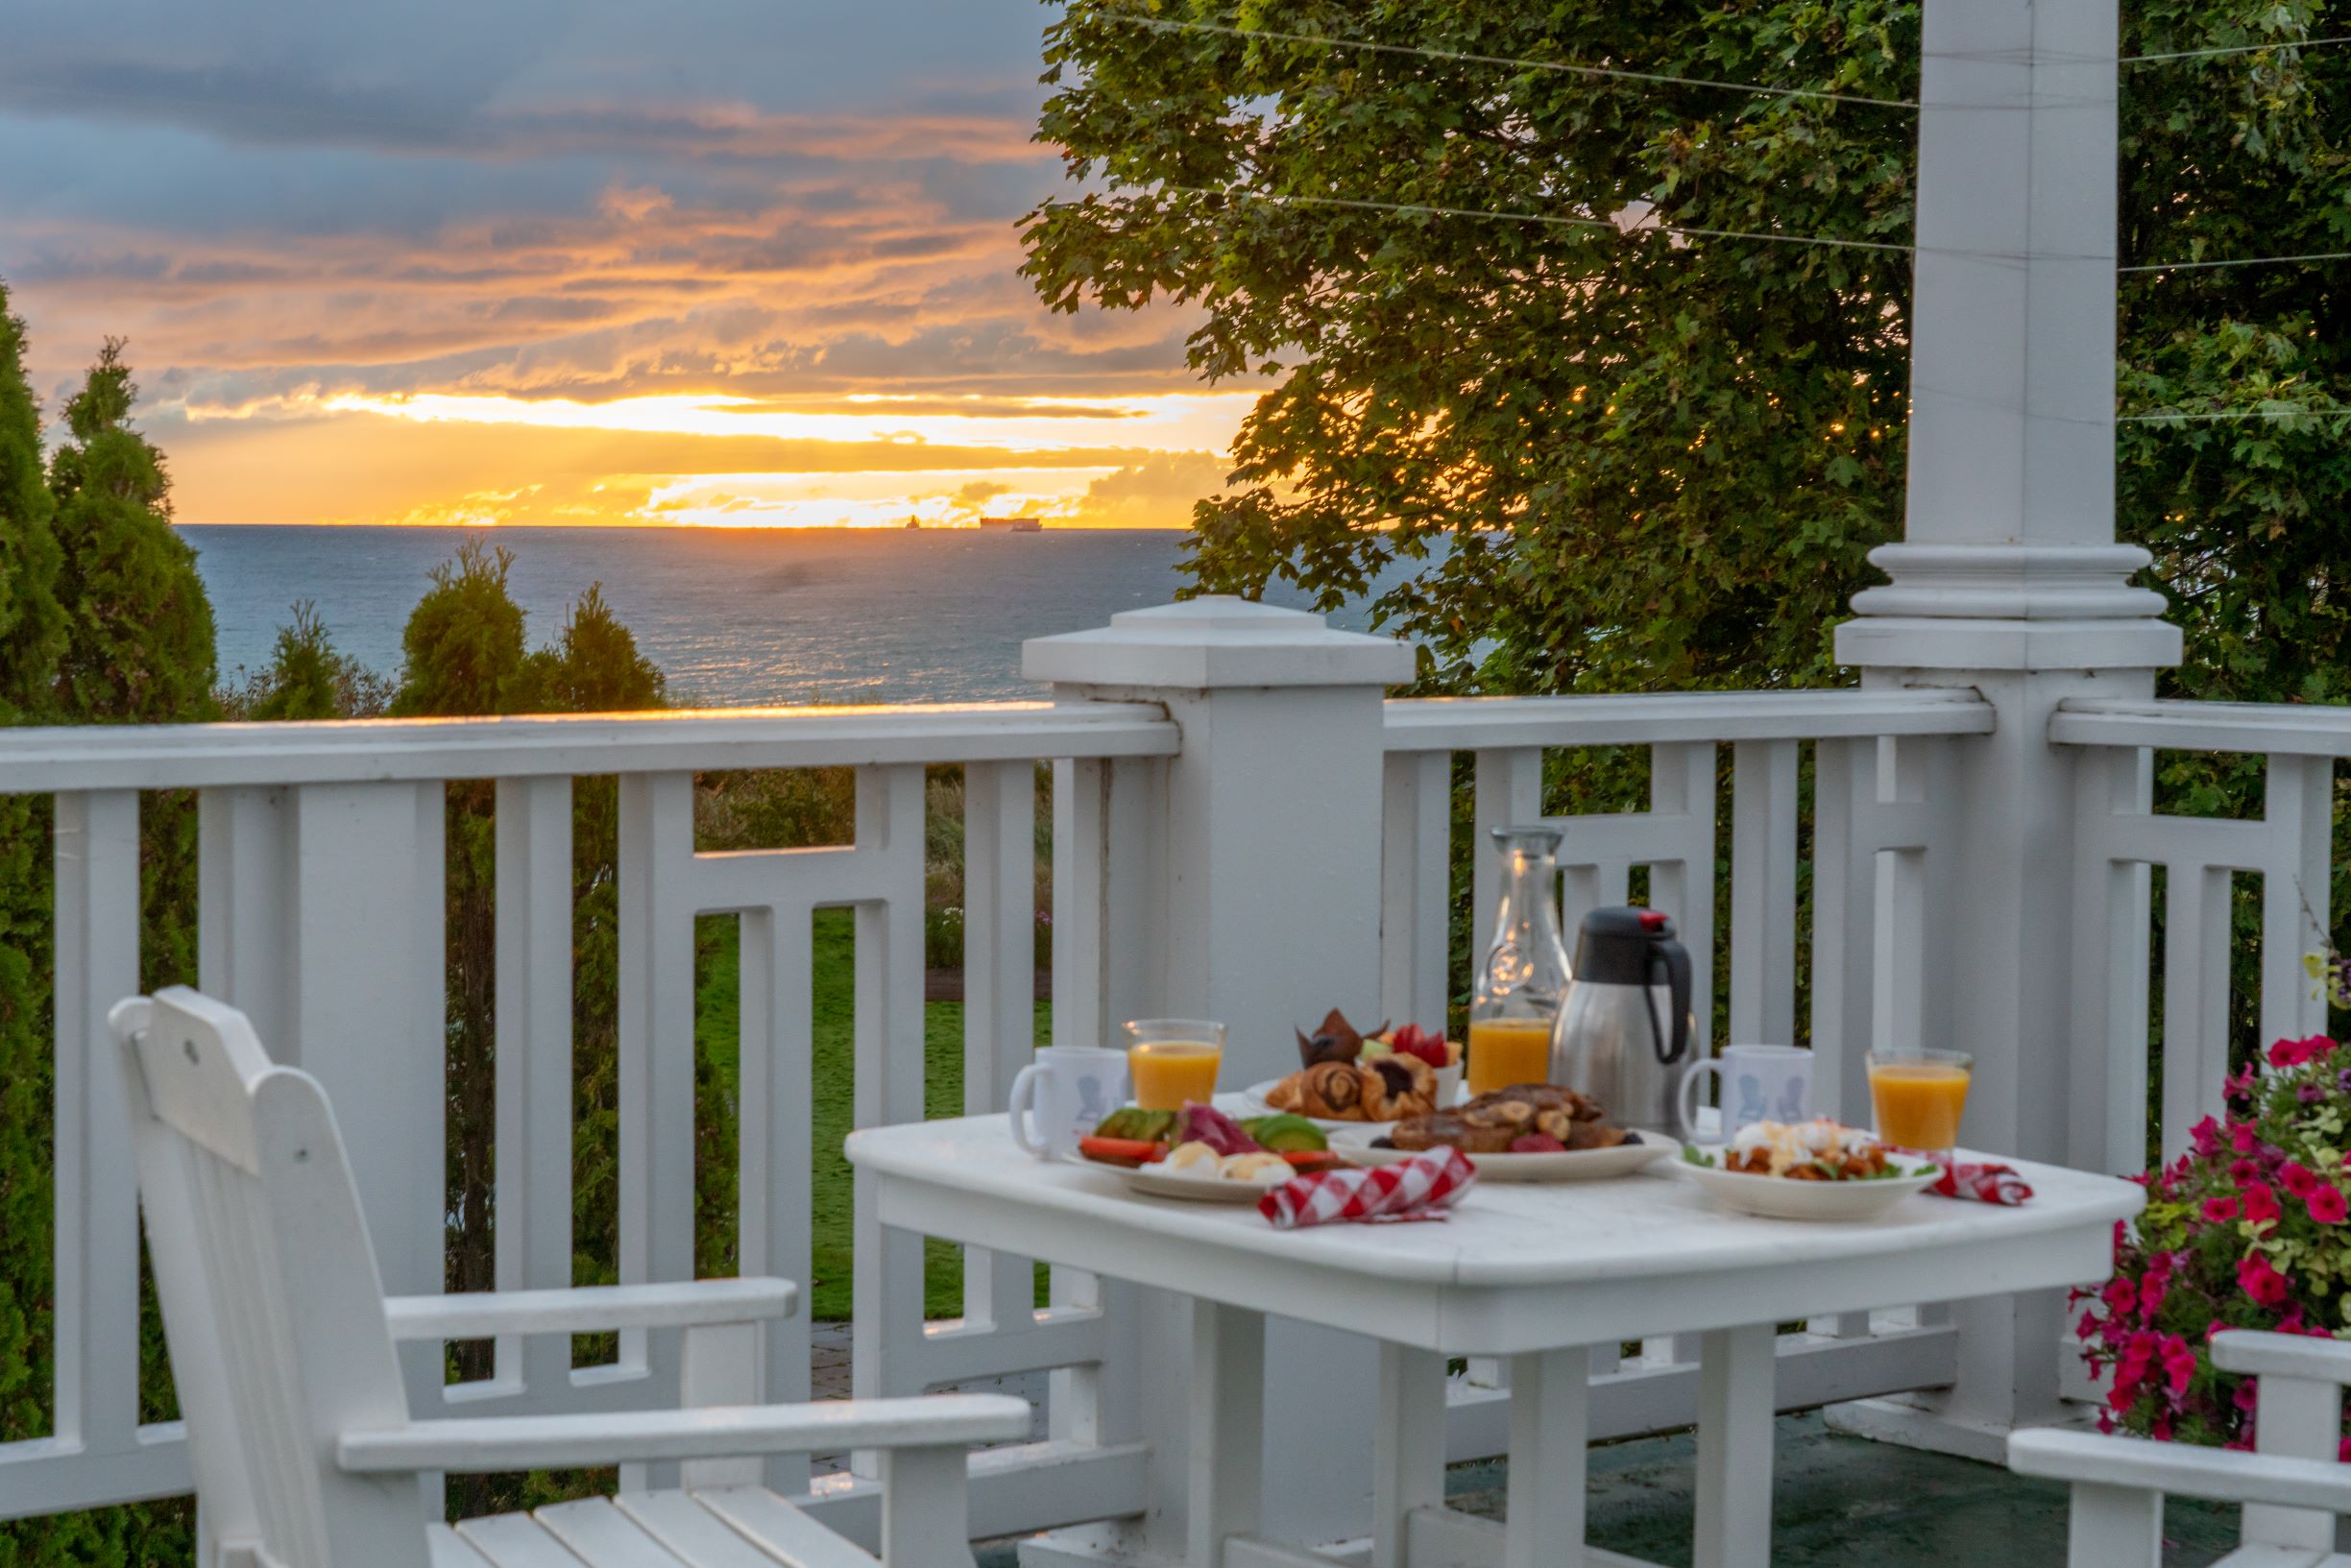 Plates of breakfast food cover a table in an outdoor dining area with a sunrise view of the water on Mackinac Island.